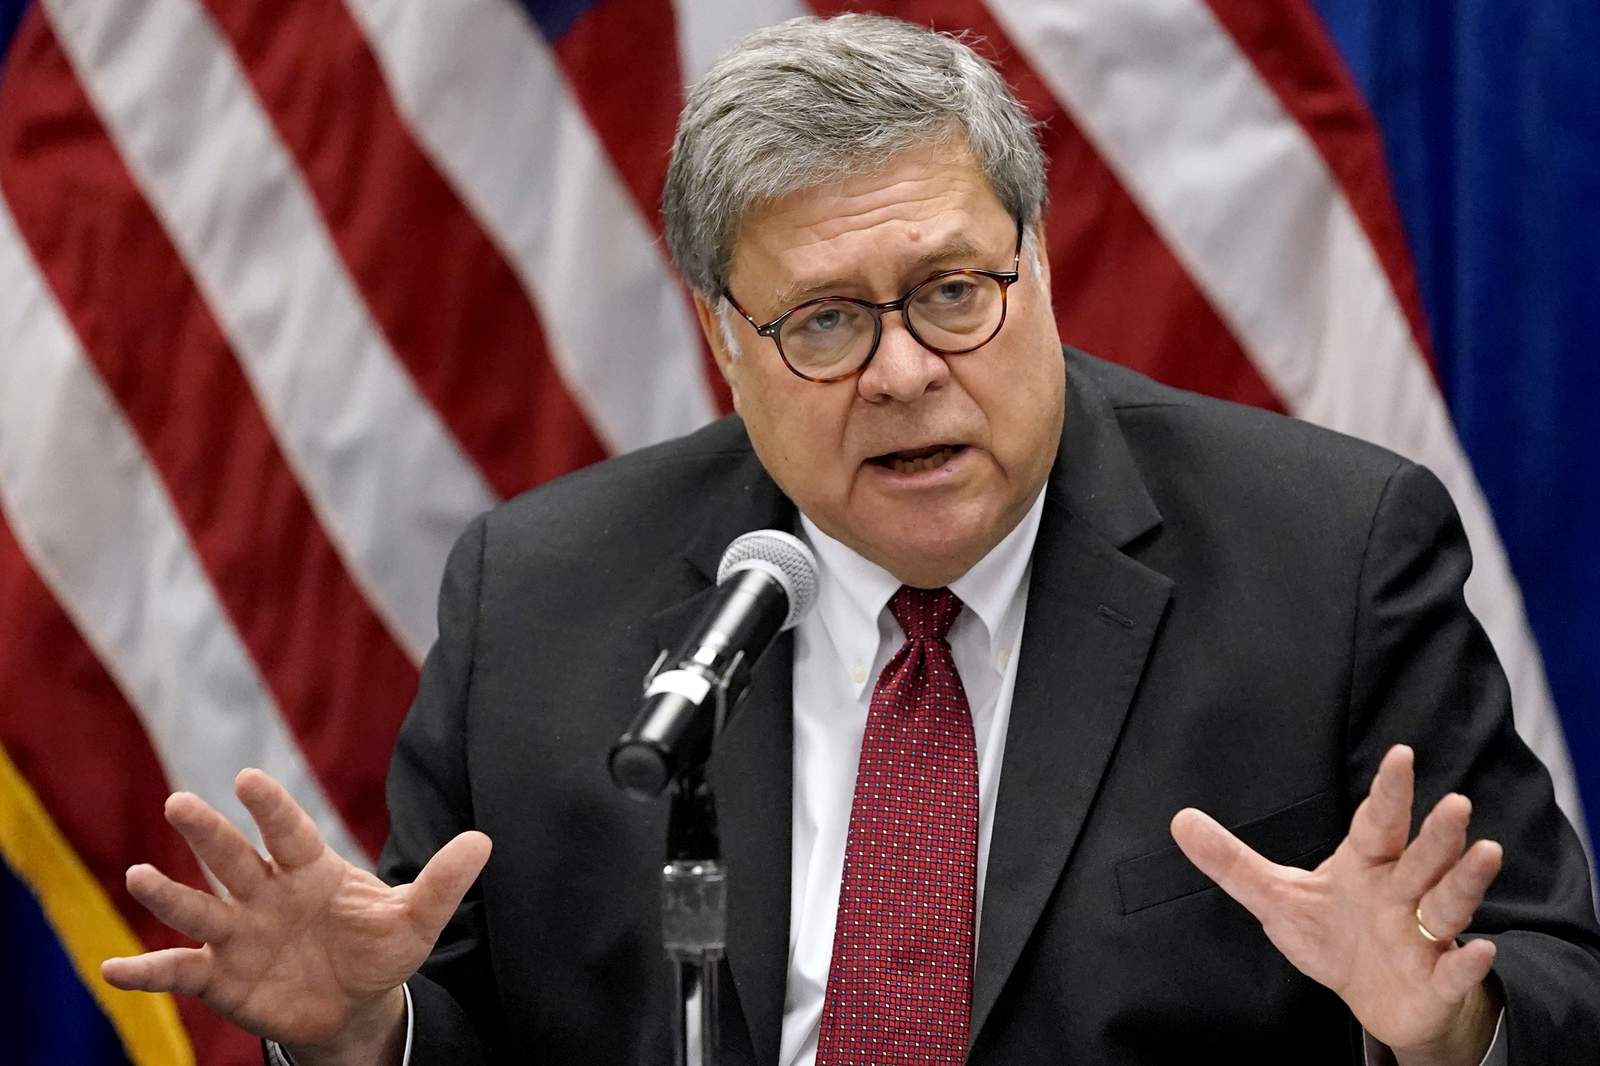 President Trump says Attorney General William Barr is resigning